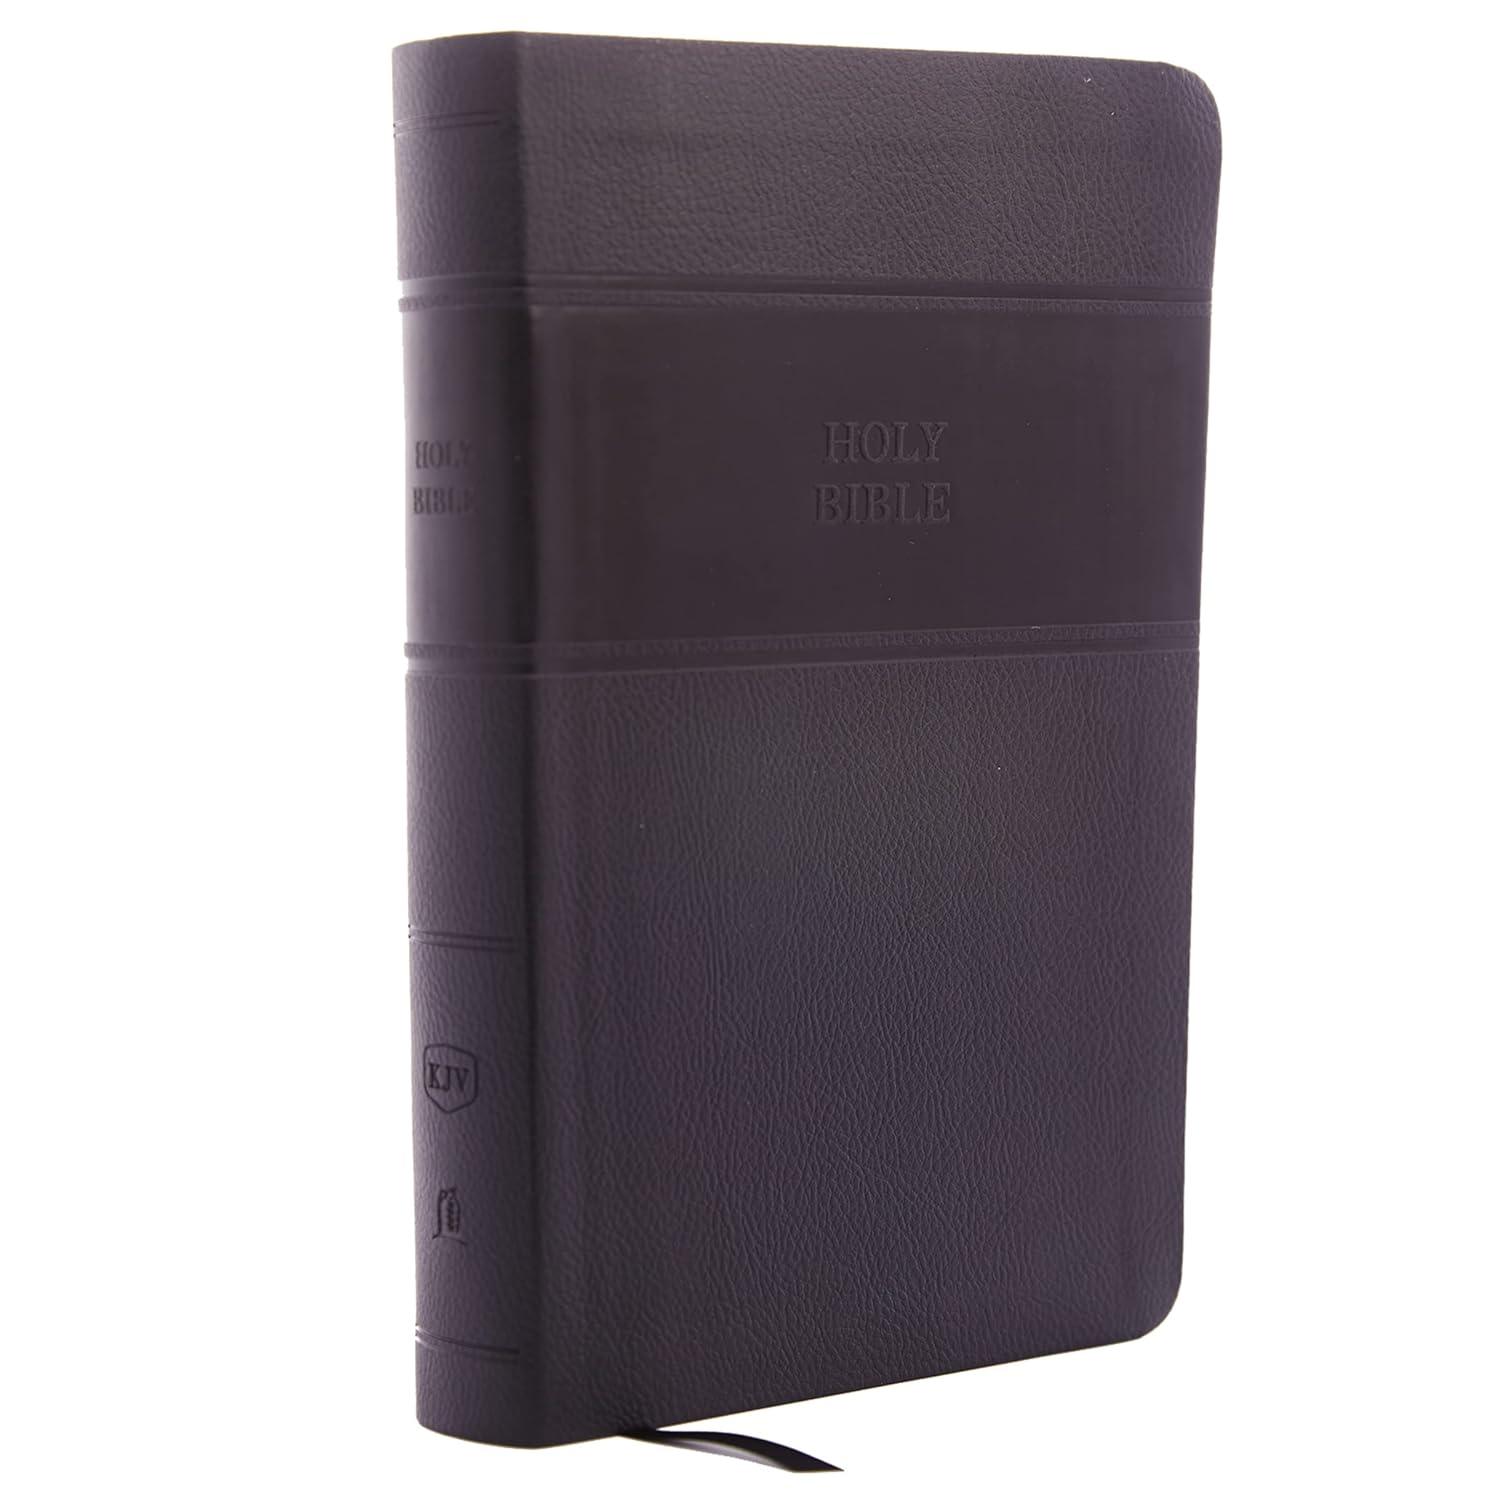 GIANT PRINT BIBLE + REF/KJV/BLK - The Low Vision Store